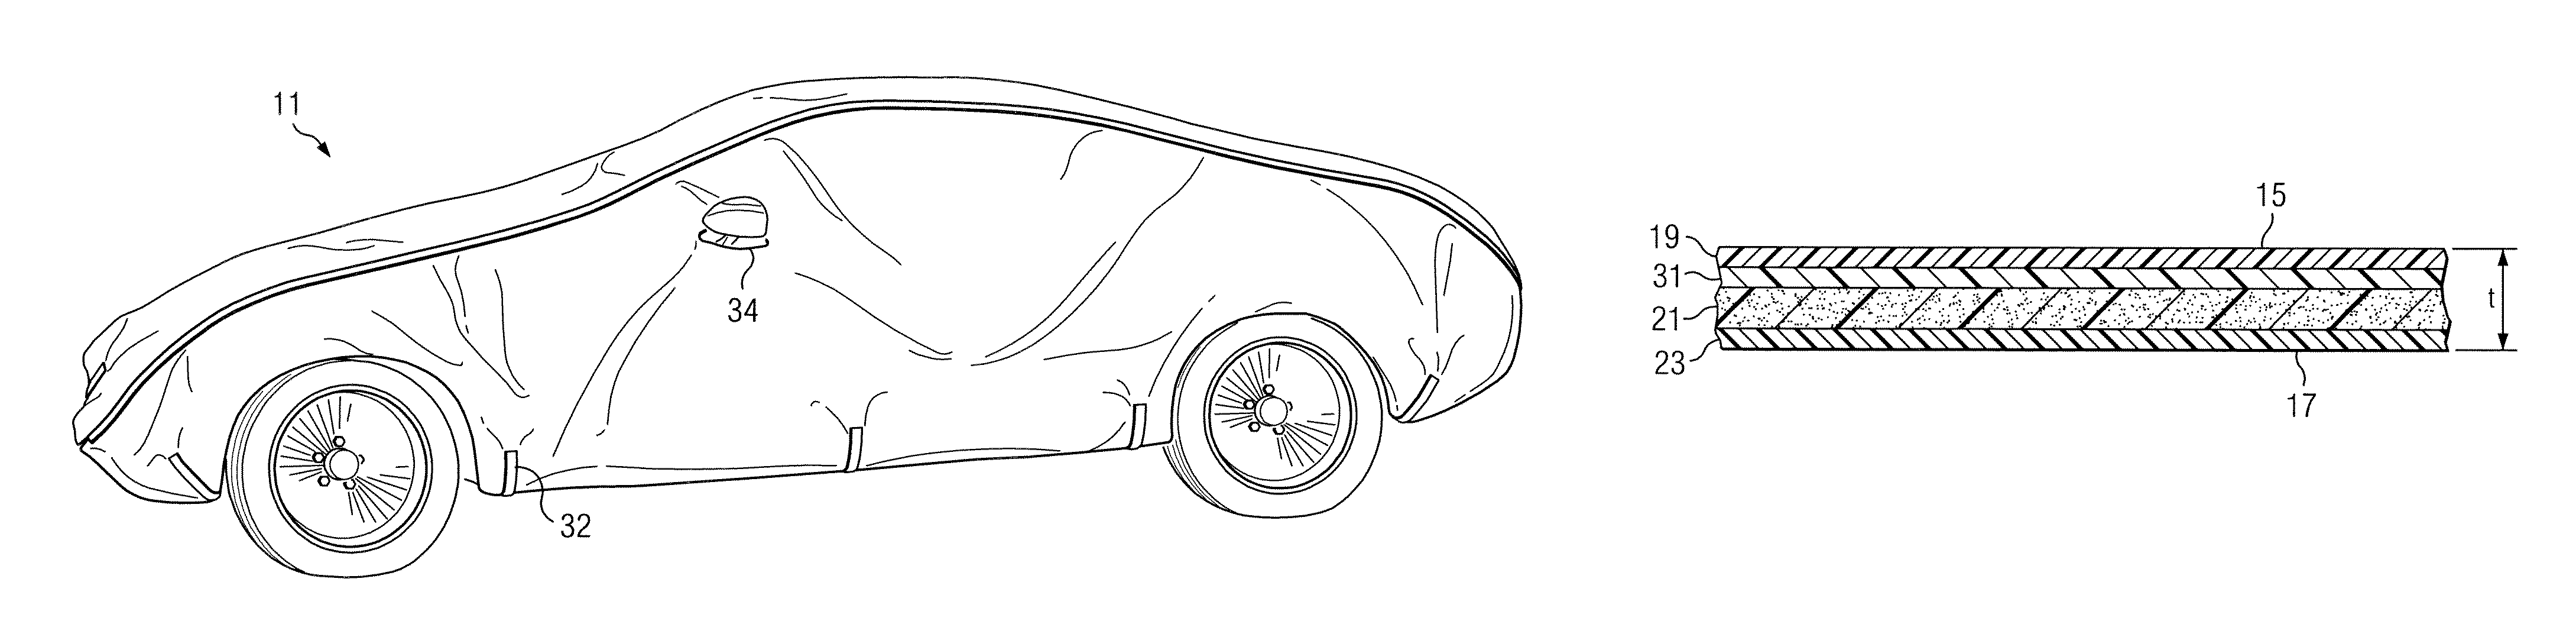 Protective vehicle cover